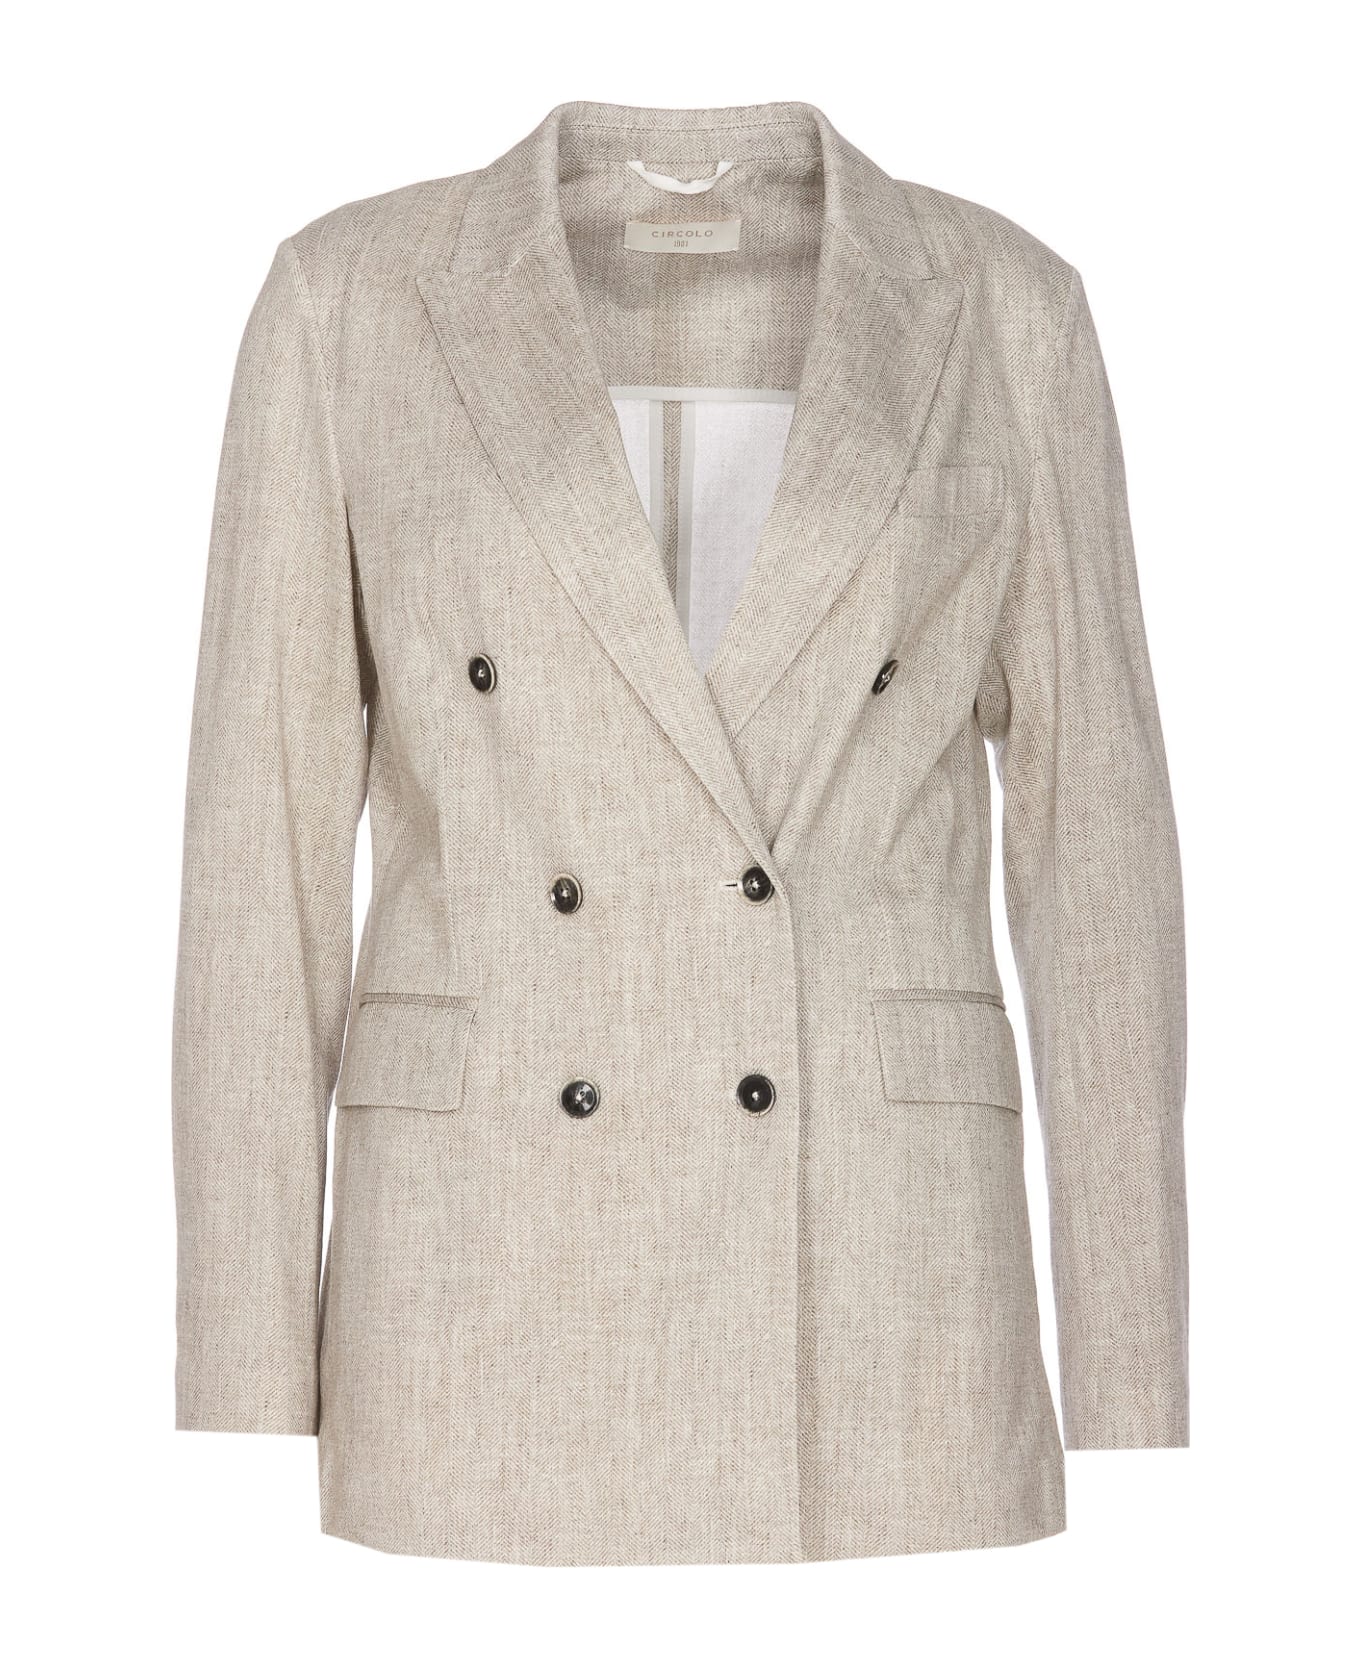 Circolo 1901 Double Breasted Jacket - Beige